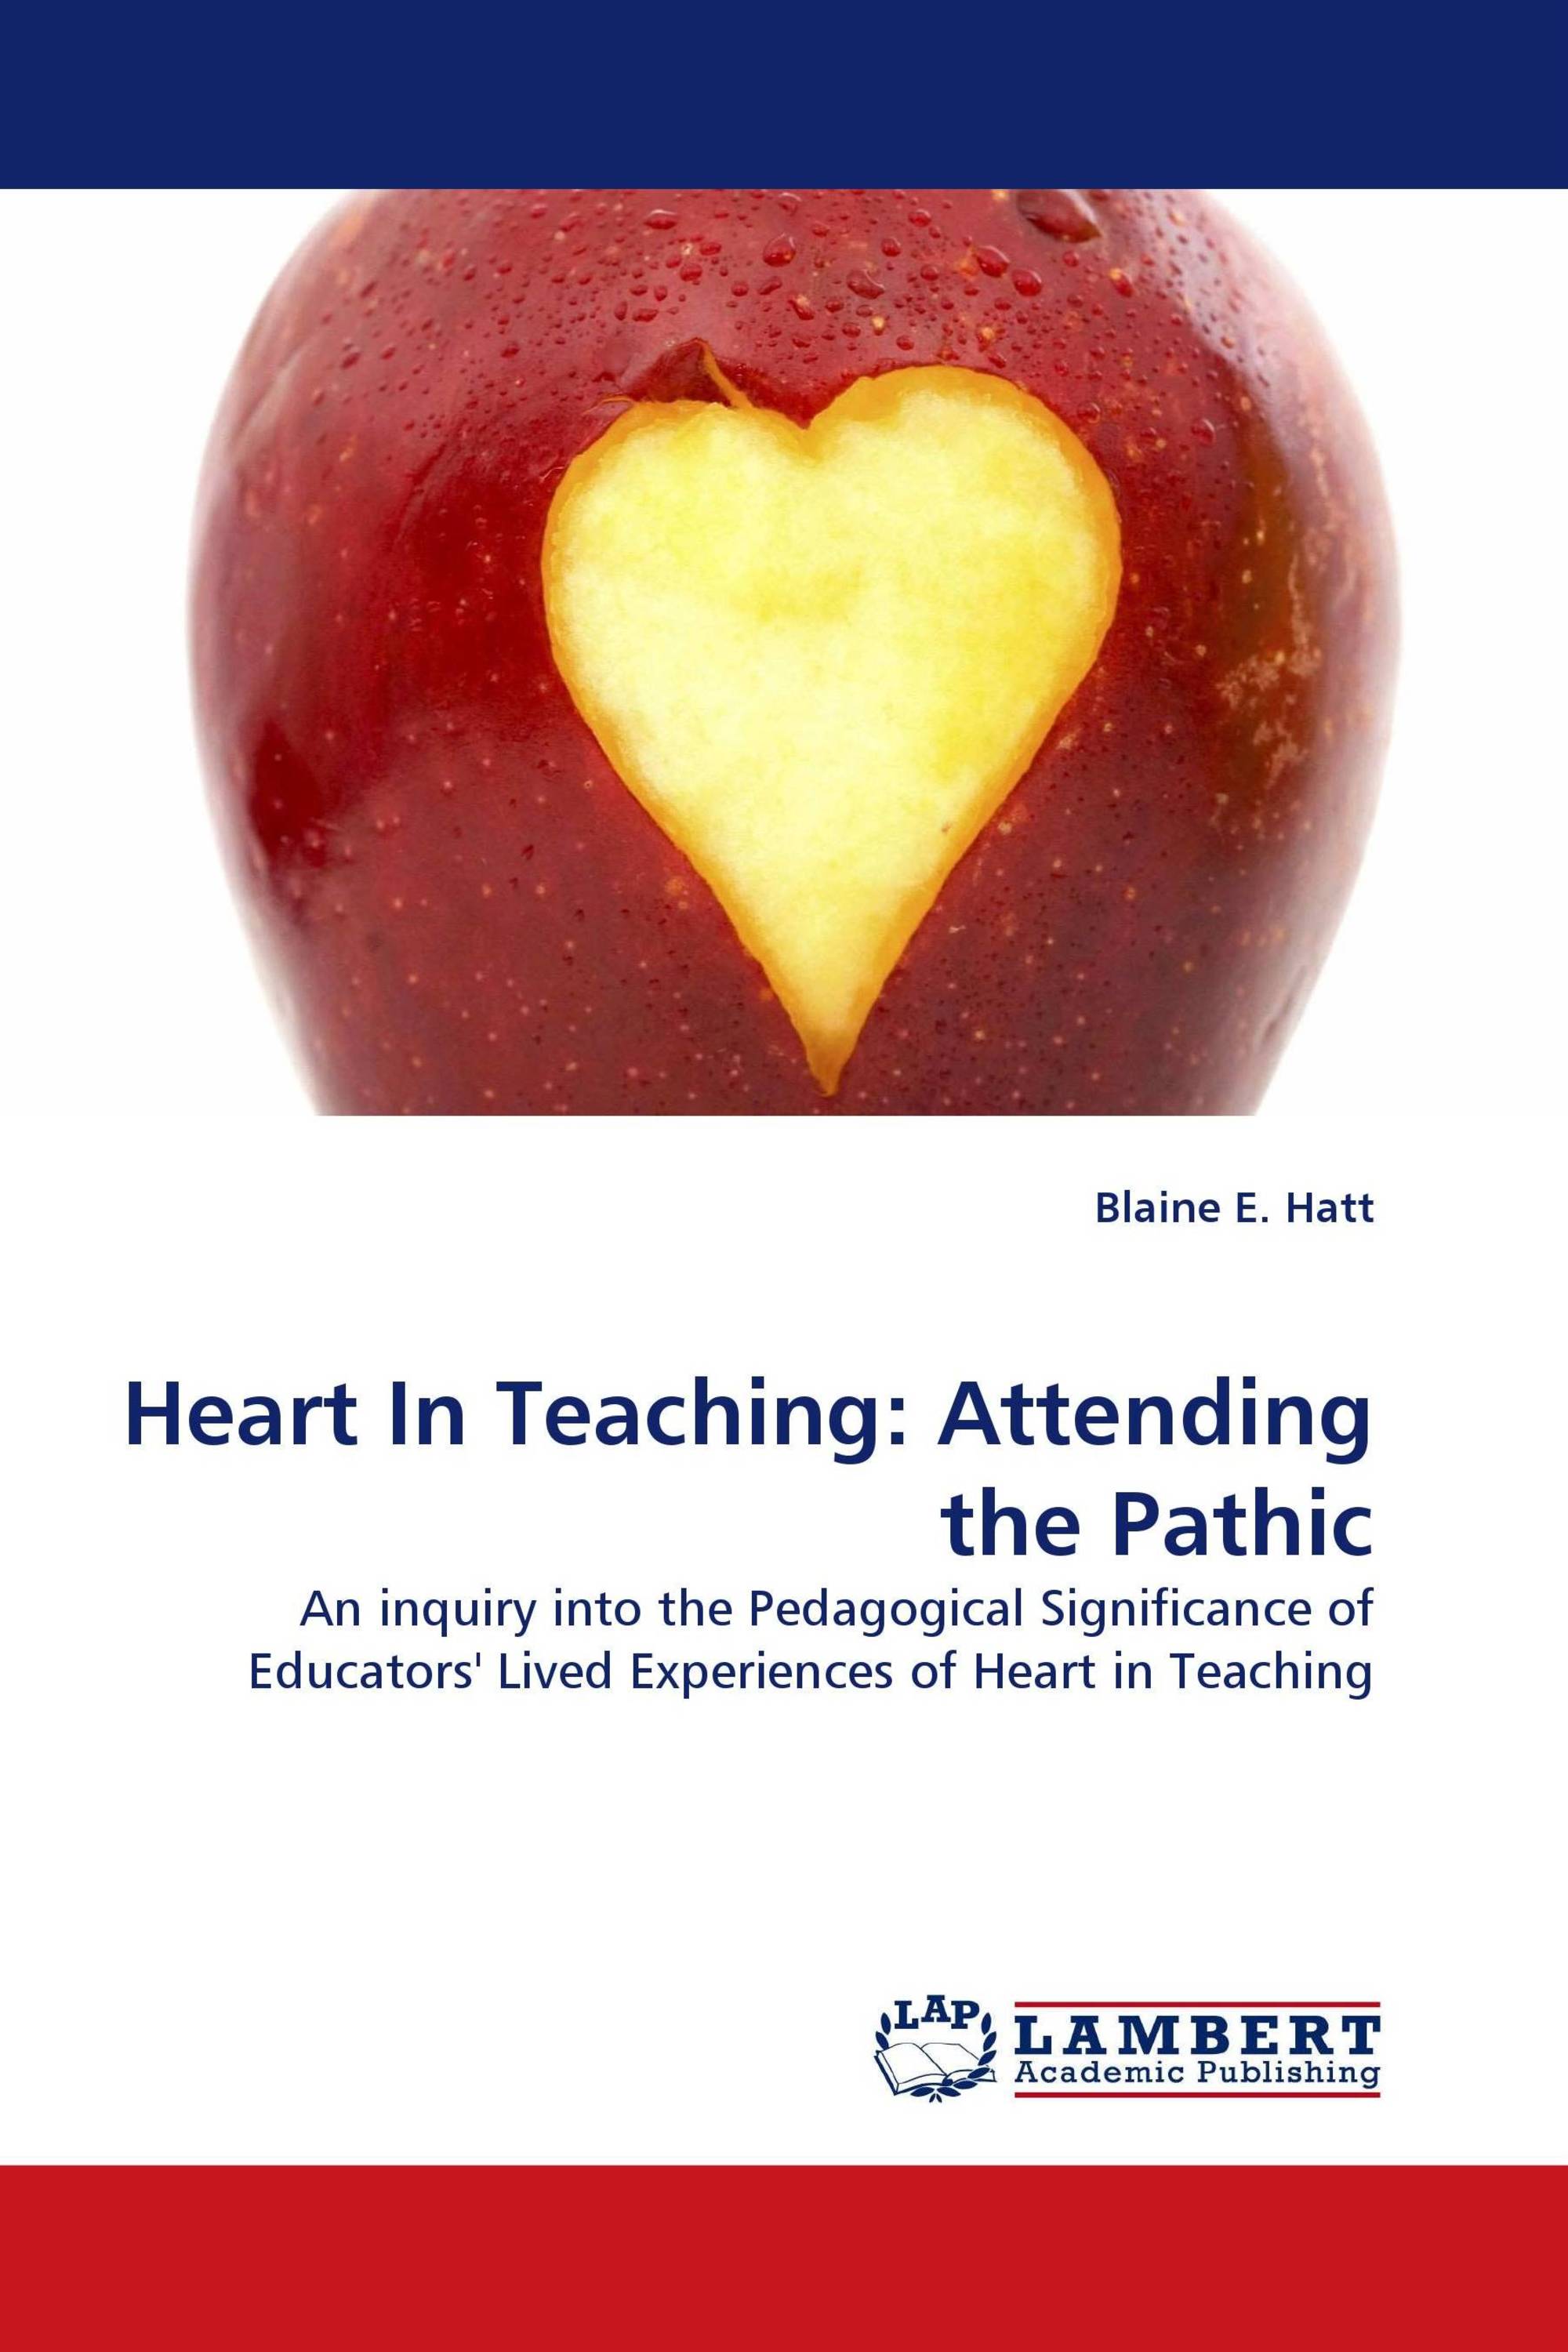 Heart In Teaching: Attending the Pathic